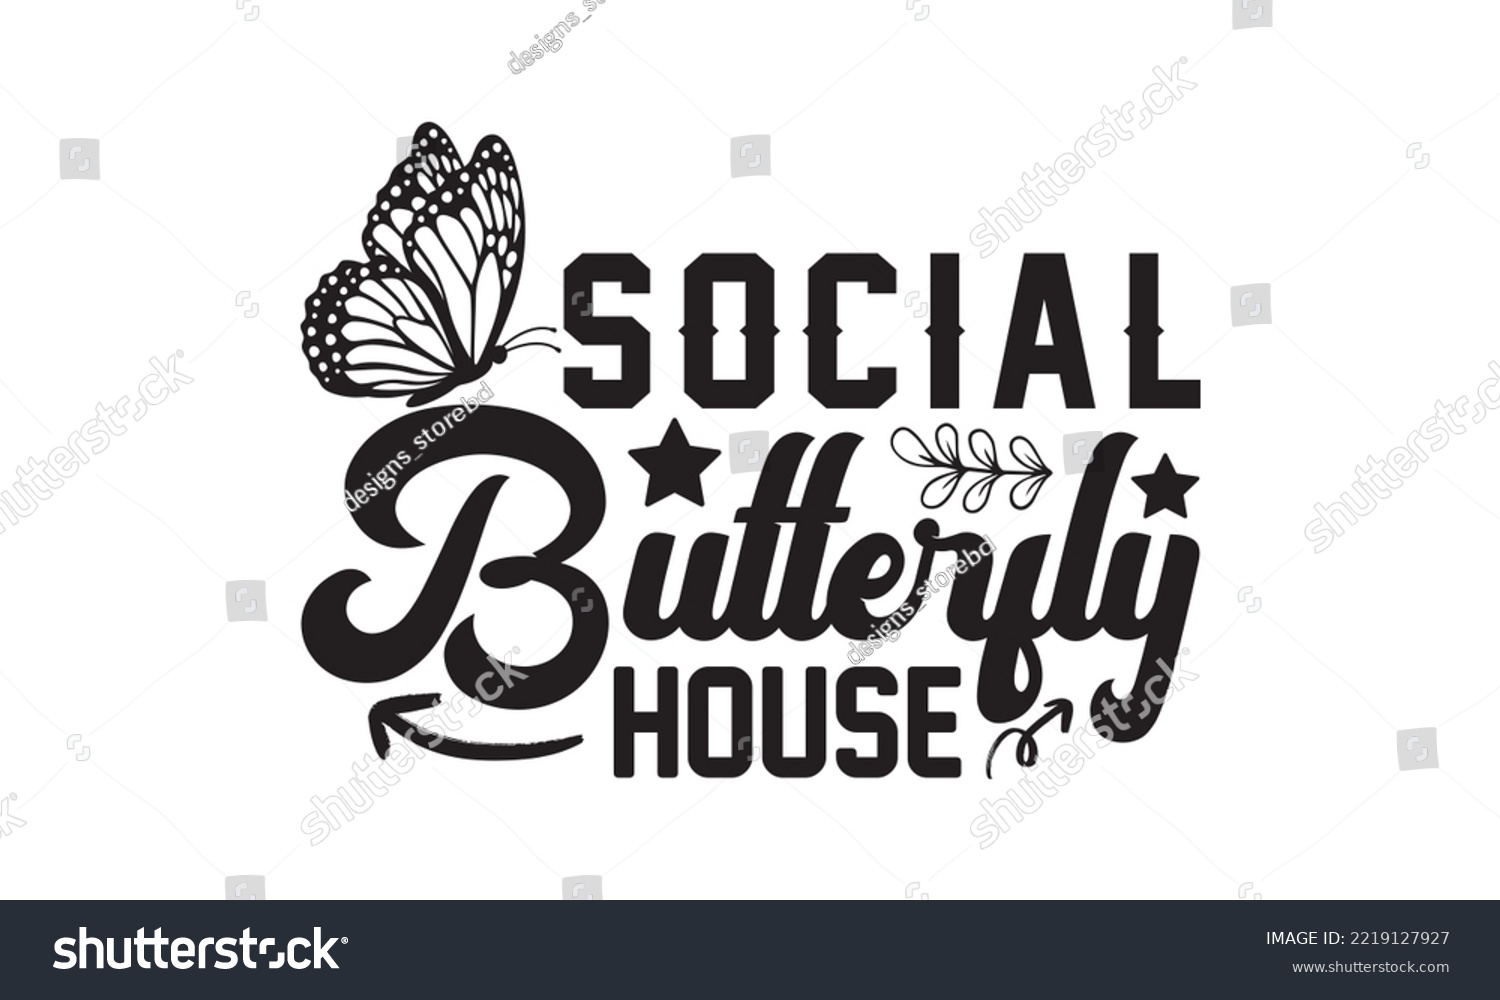 SVG of Social Butterfly House Svg, Butterfly svg, Butterfly svg t-shirt design, butterflies and daisies positive quote flower watercolor margarita mariposa stationery, mug, t shirt, svg, eps 10 svg